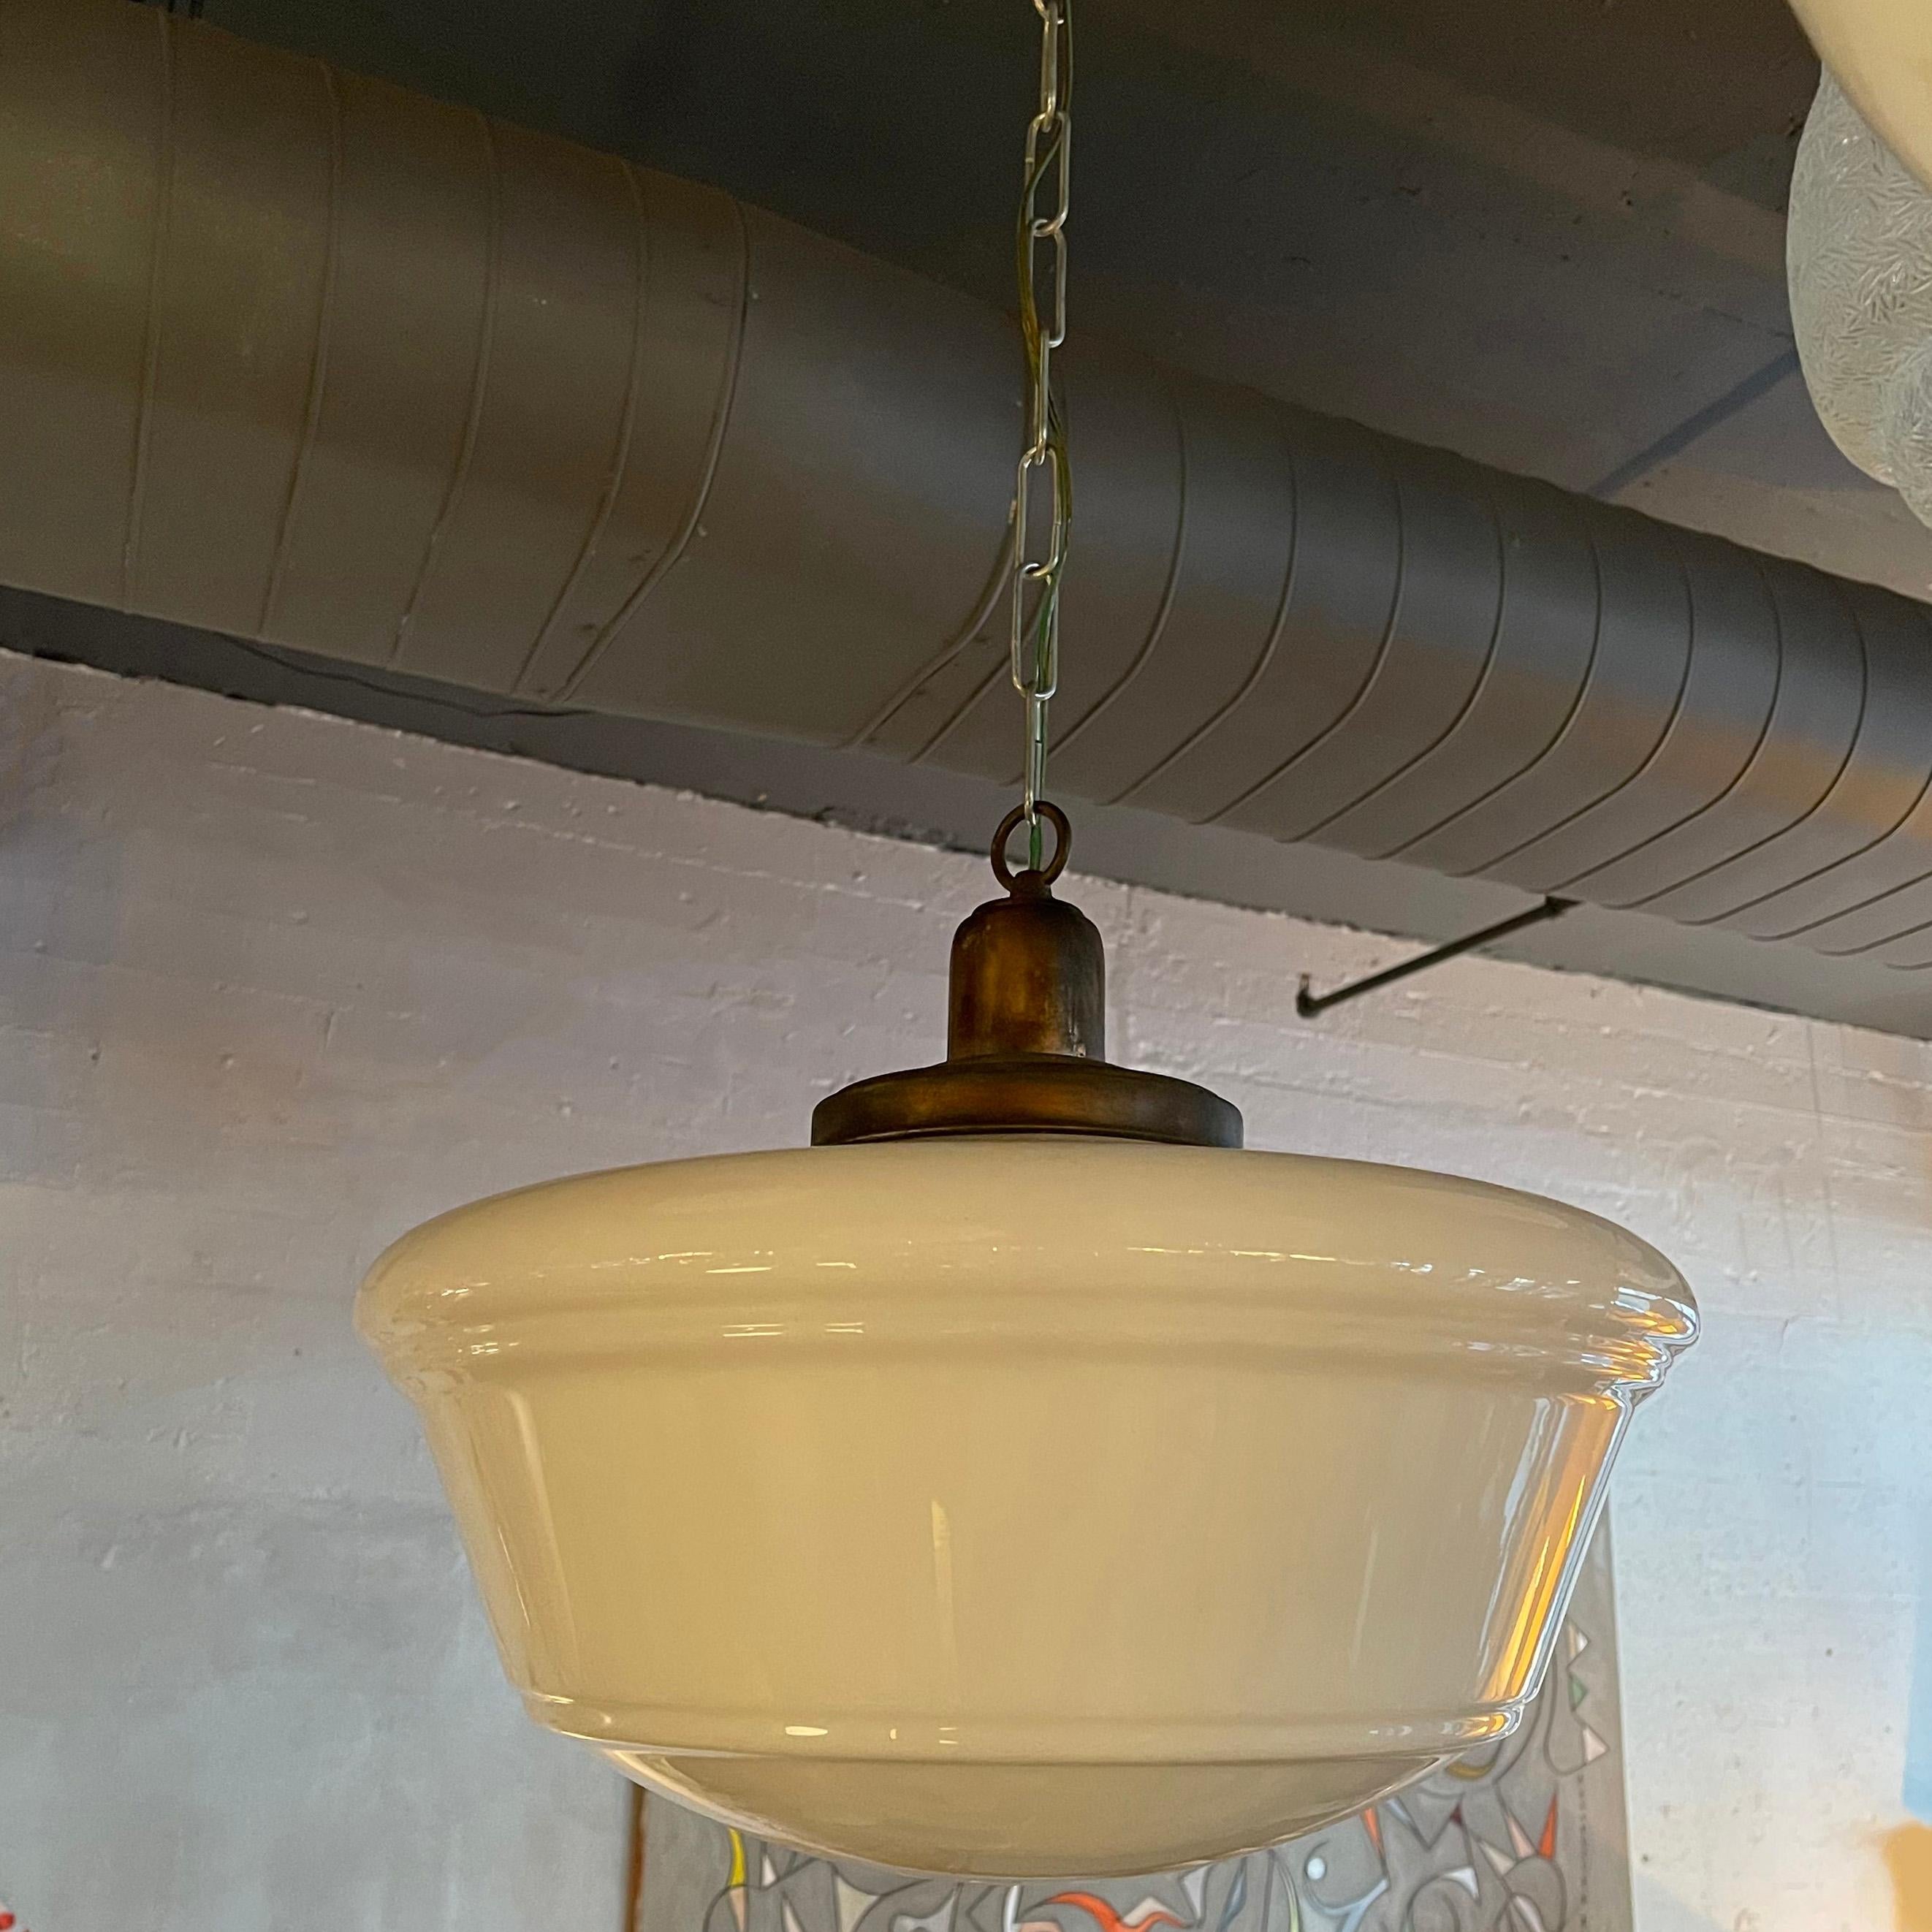 Art Deco pendant light with large 18 inch diameter, milk glass shade, brass fitter, chain and canopy is newly wired to accept up to 200 watt bulb and hangs at an overall height of 68 inches.